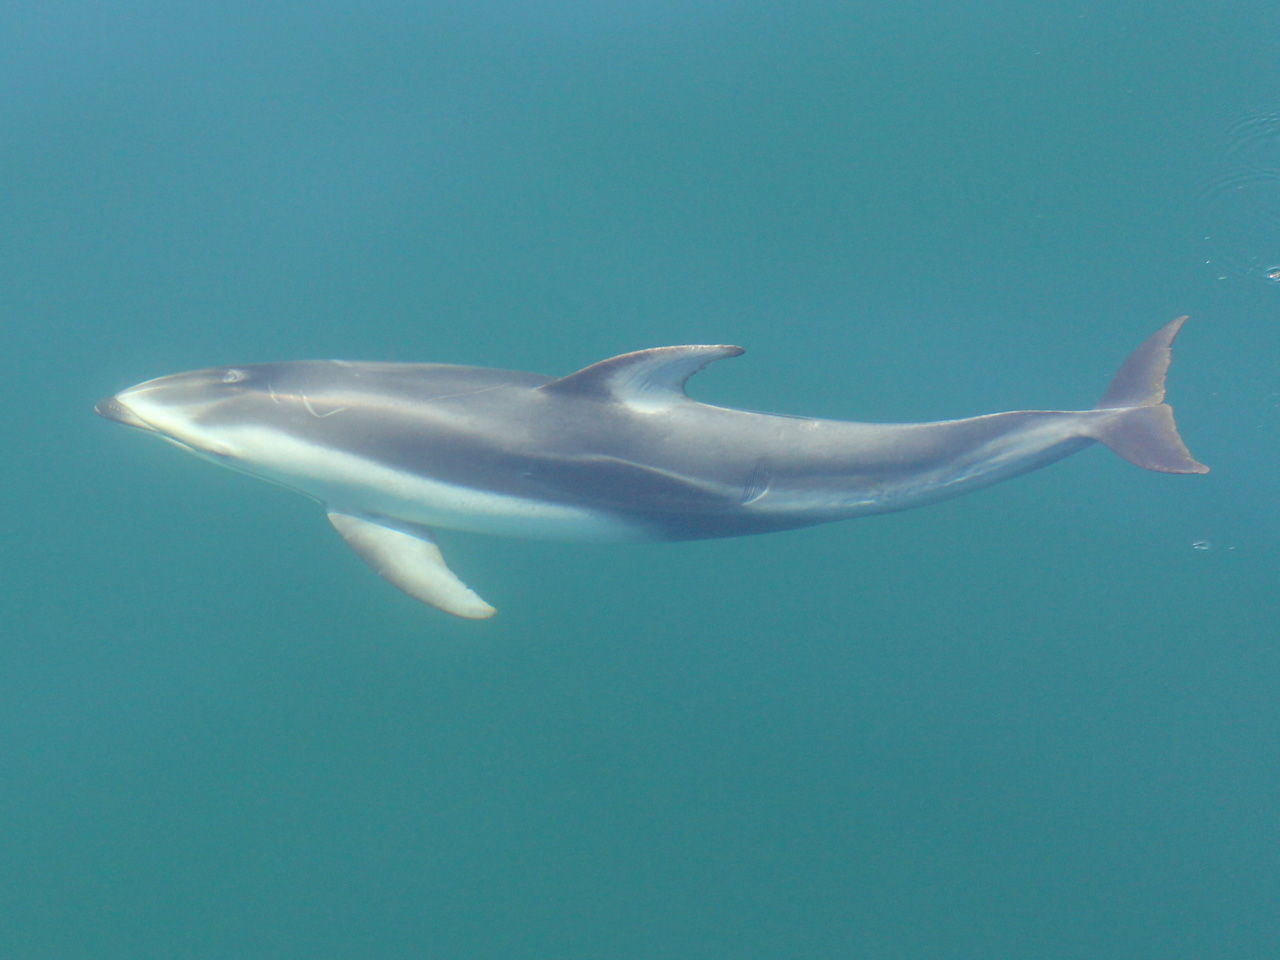 A Pacific white-sided dolphin swimming underwater